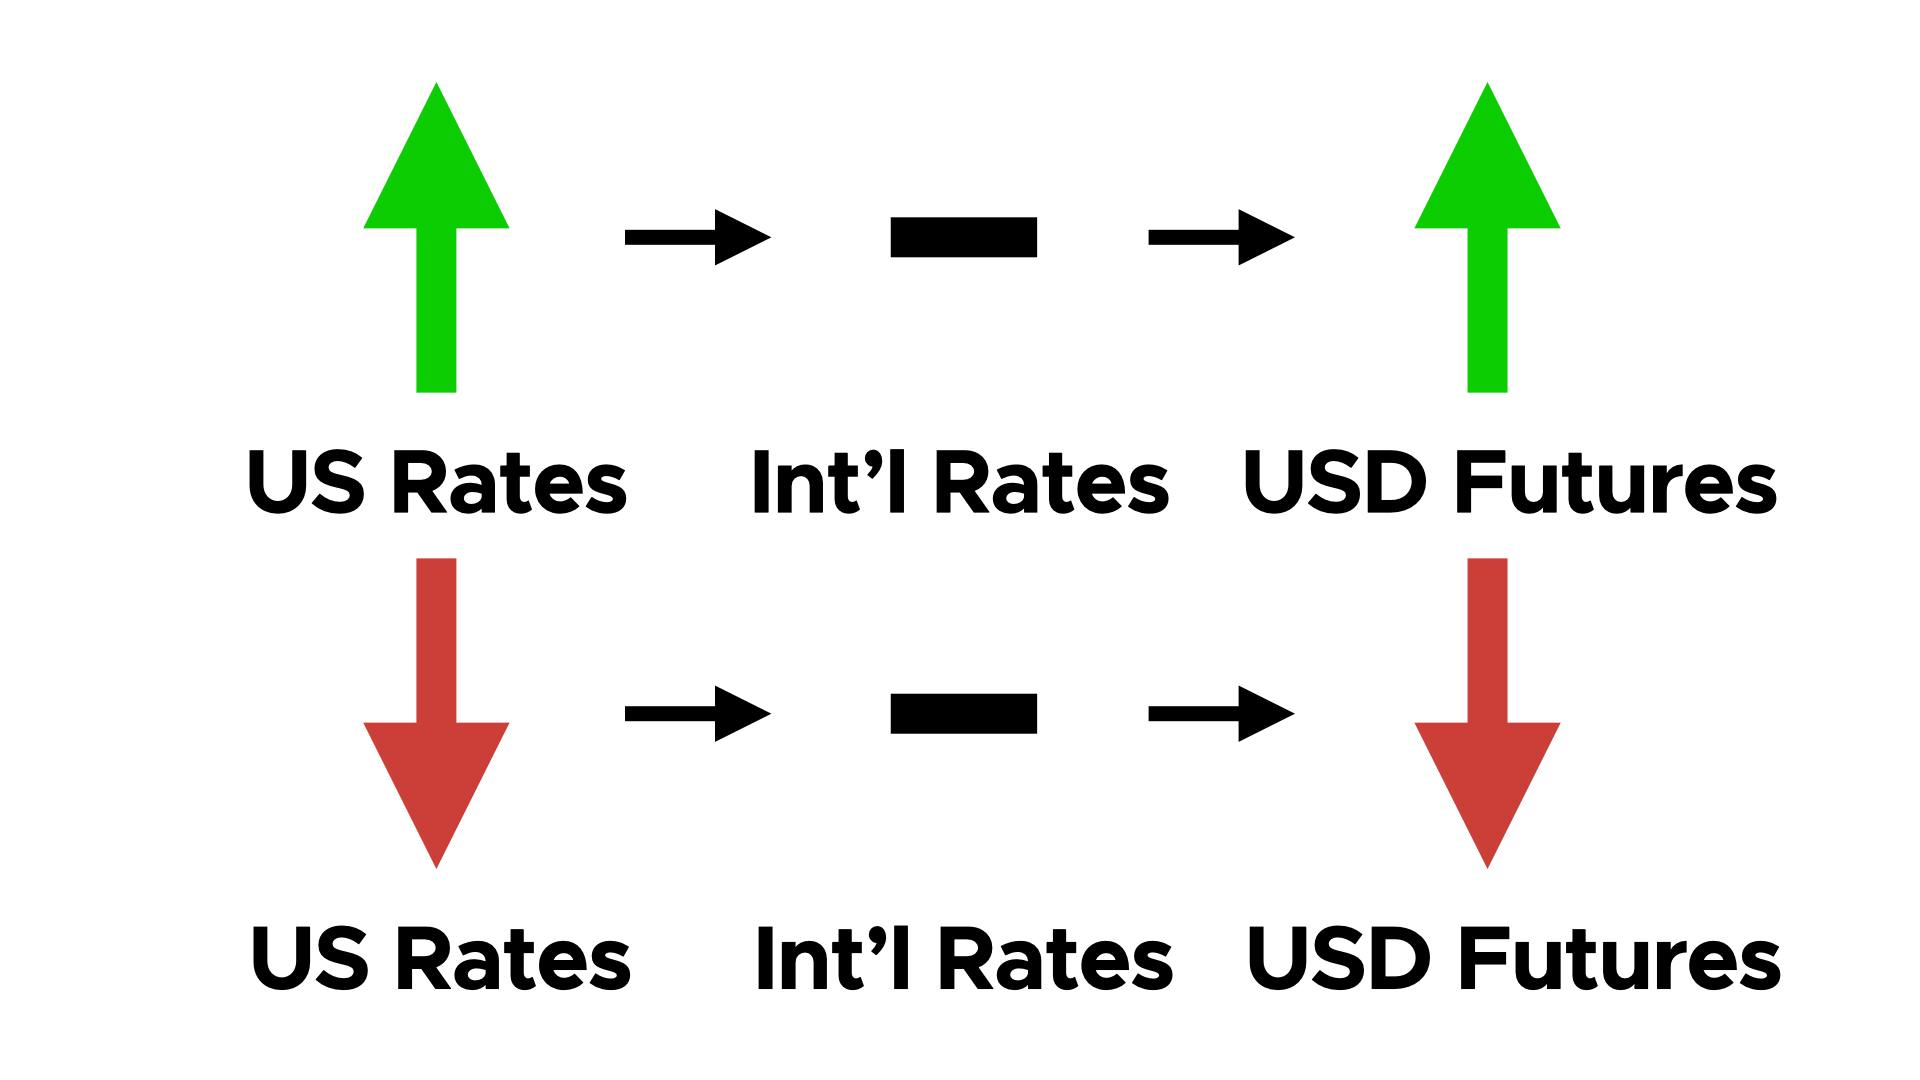 How do Changes in Interest Rates Affect Currency Trading? - 1